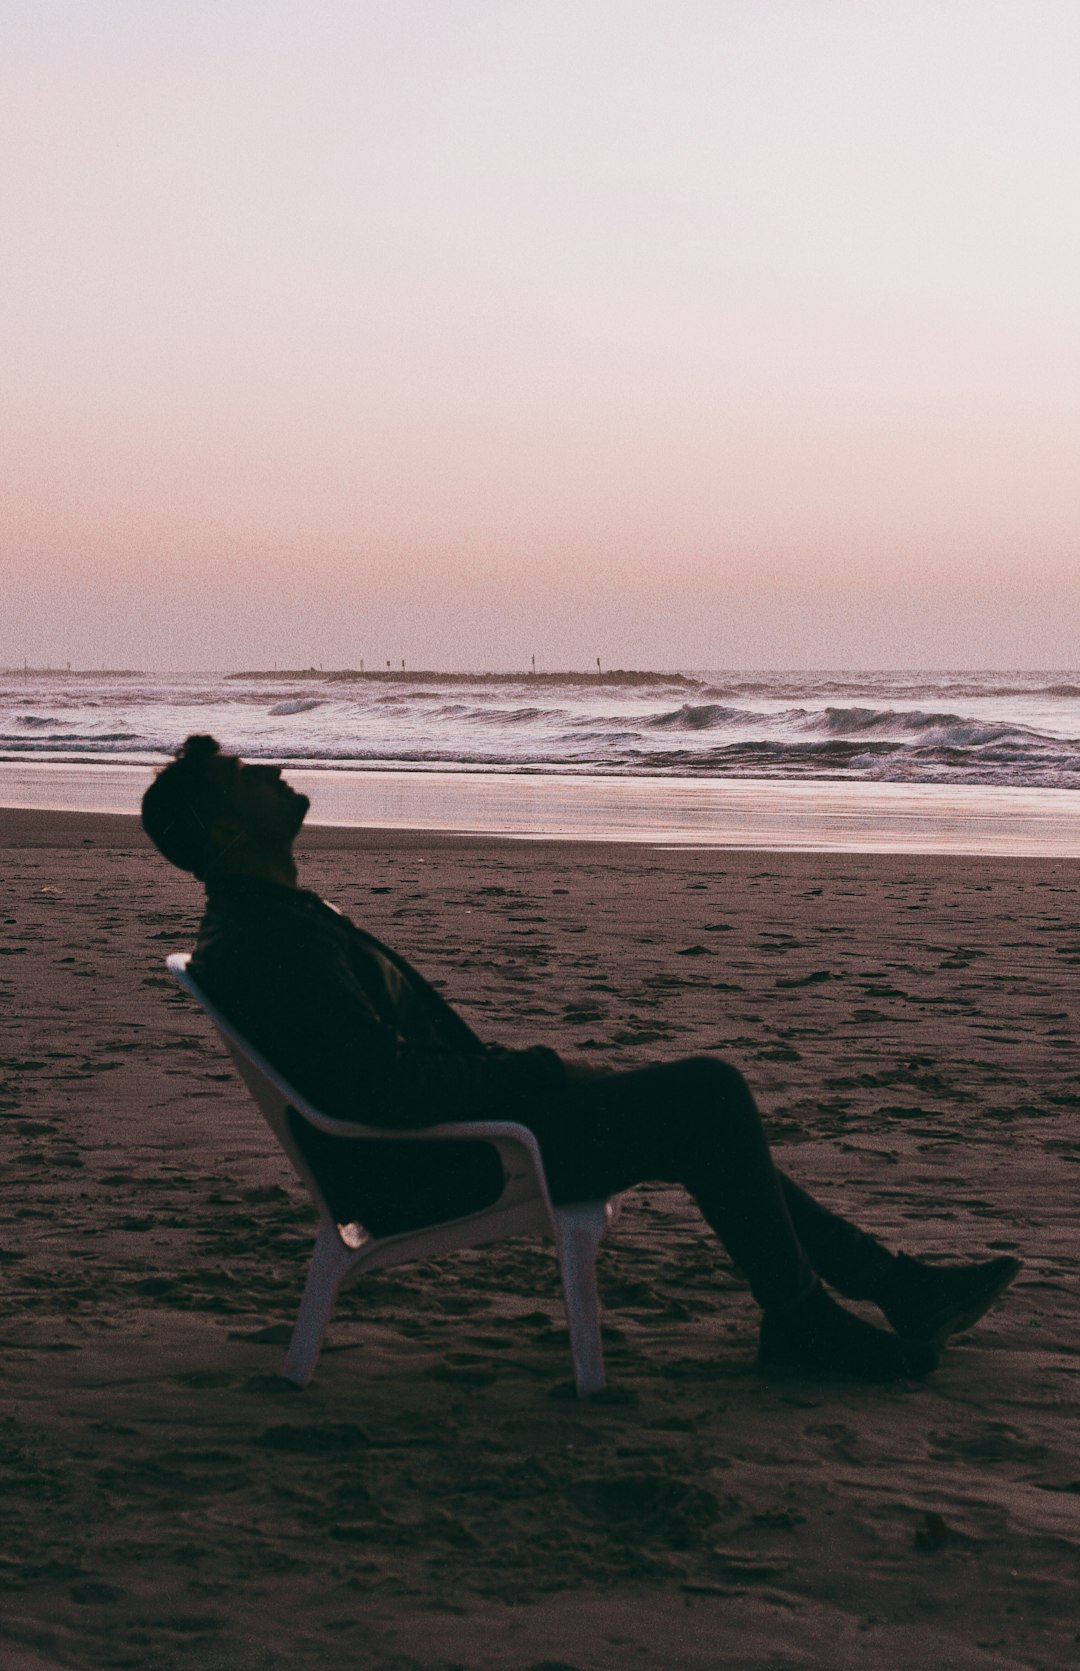 silhouette of person sitting on white plastic chair on beach during daytime